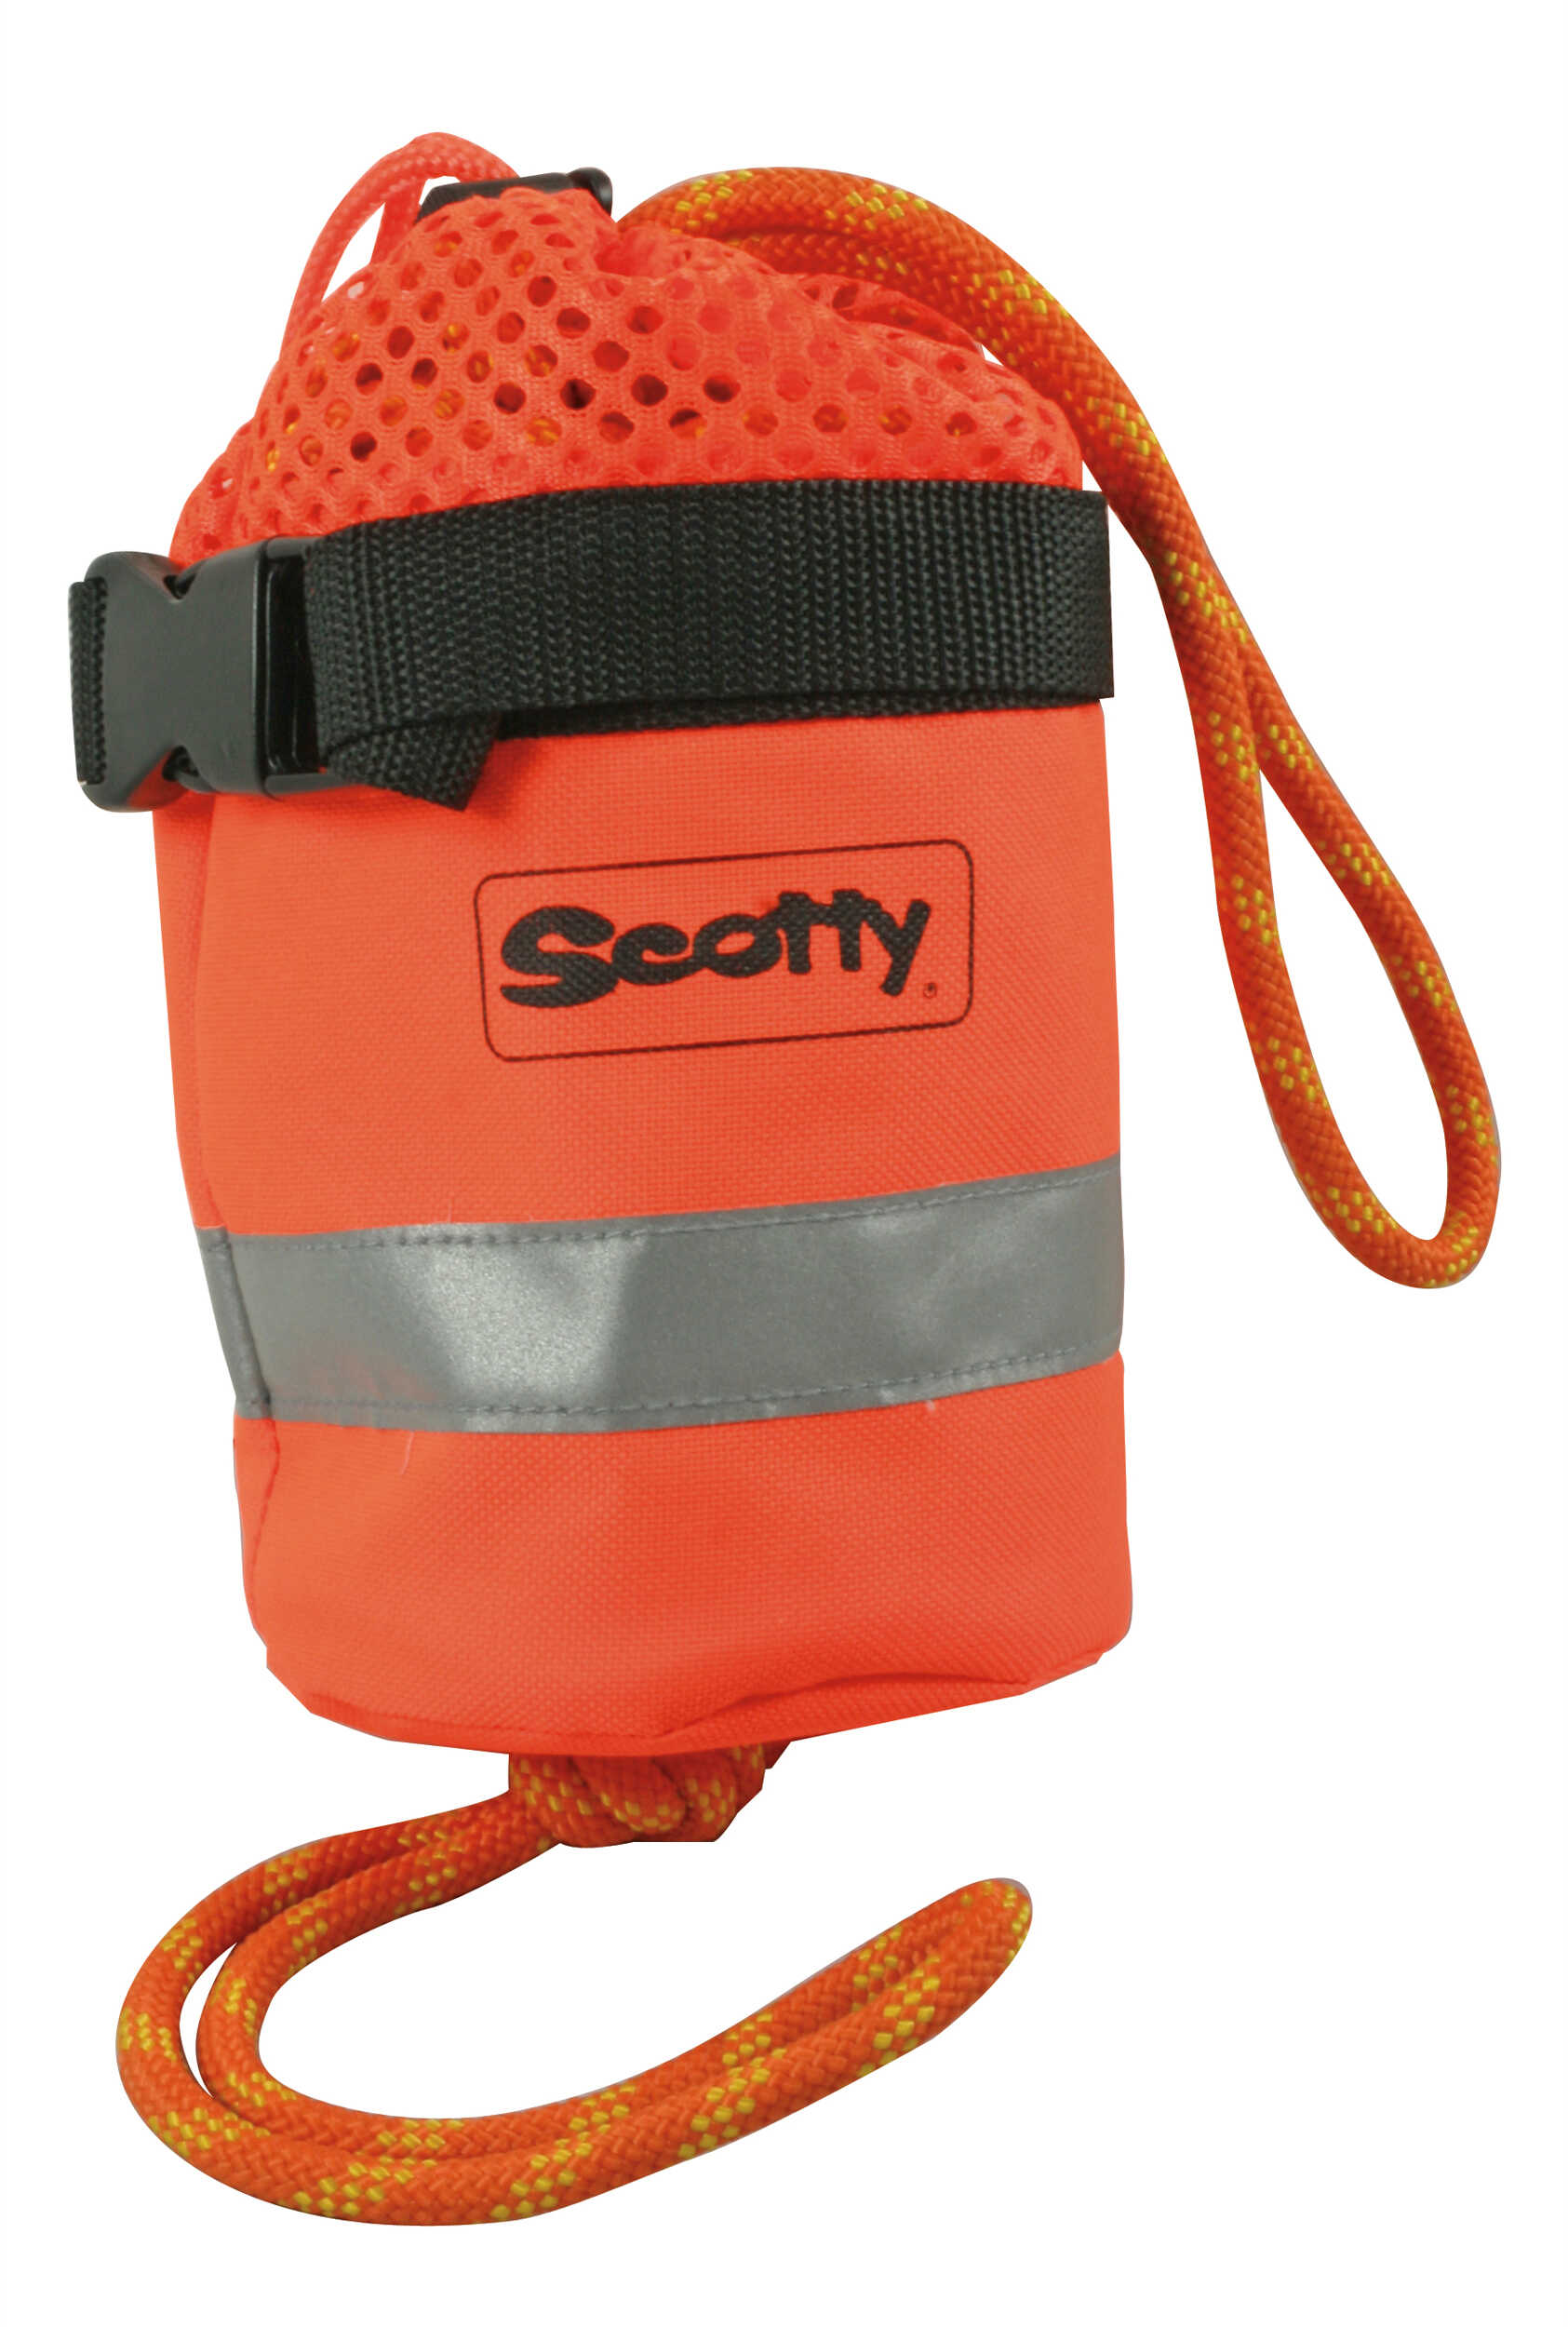 Scotty Throw Bag w/50 ft Floating MFP Line Md: 0793